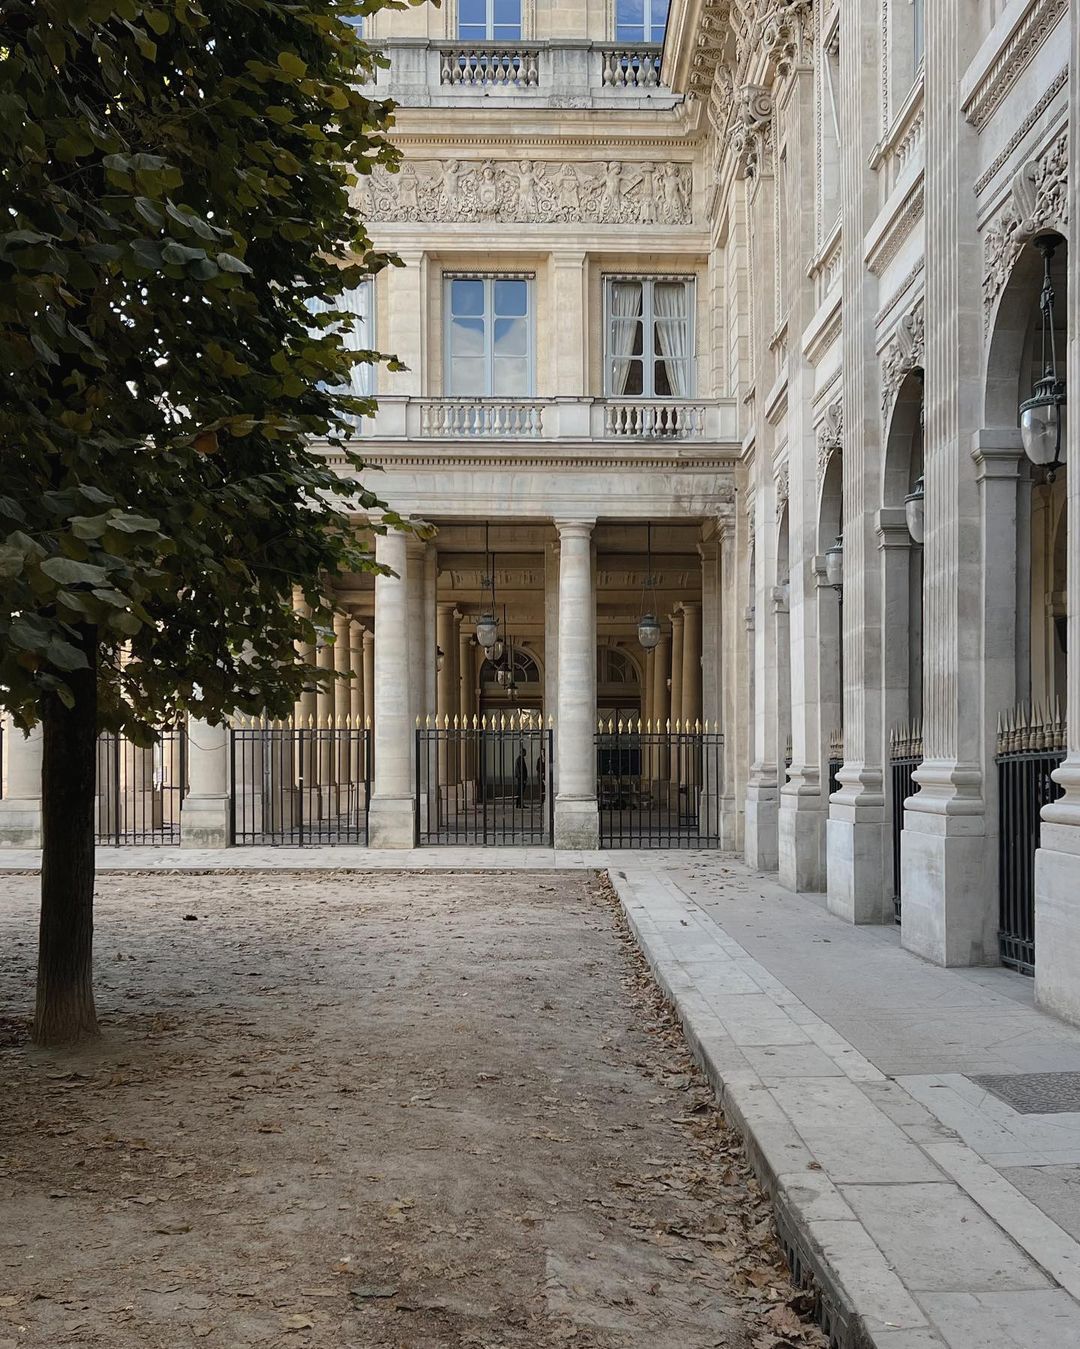 The entrance to to Jardin du Palais-Royal from the plaza